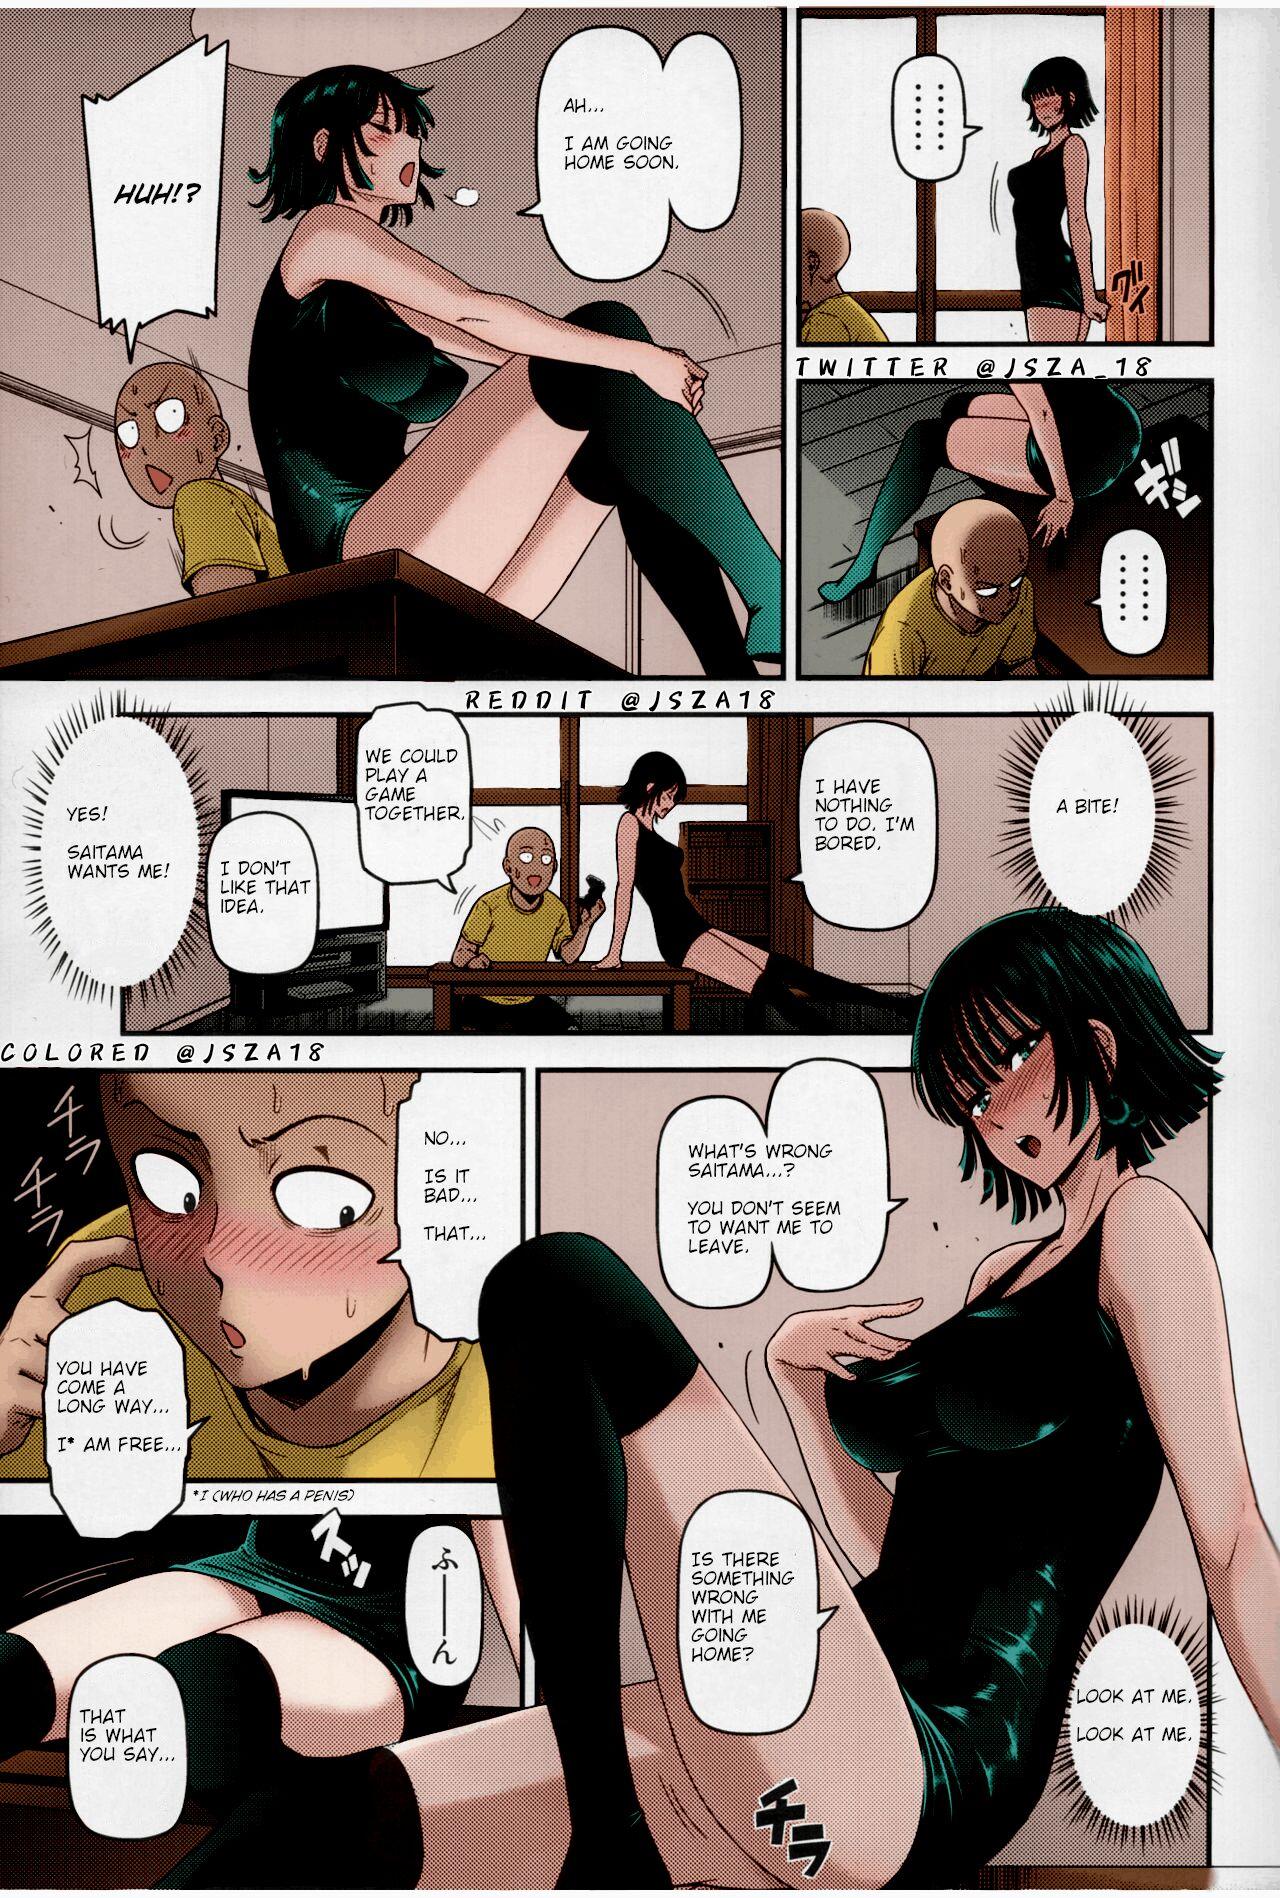 Huge Ass ONE-HURRICANE 6 - One punch man Messy - Page 8